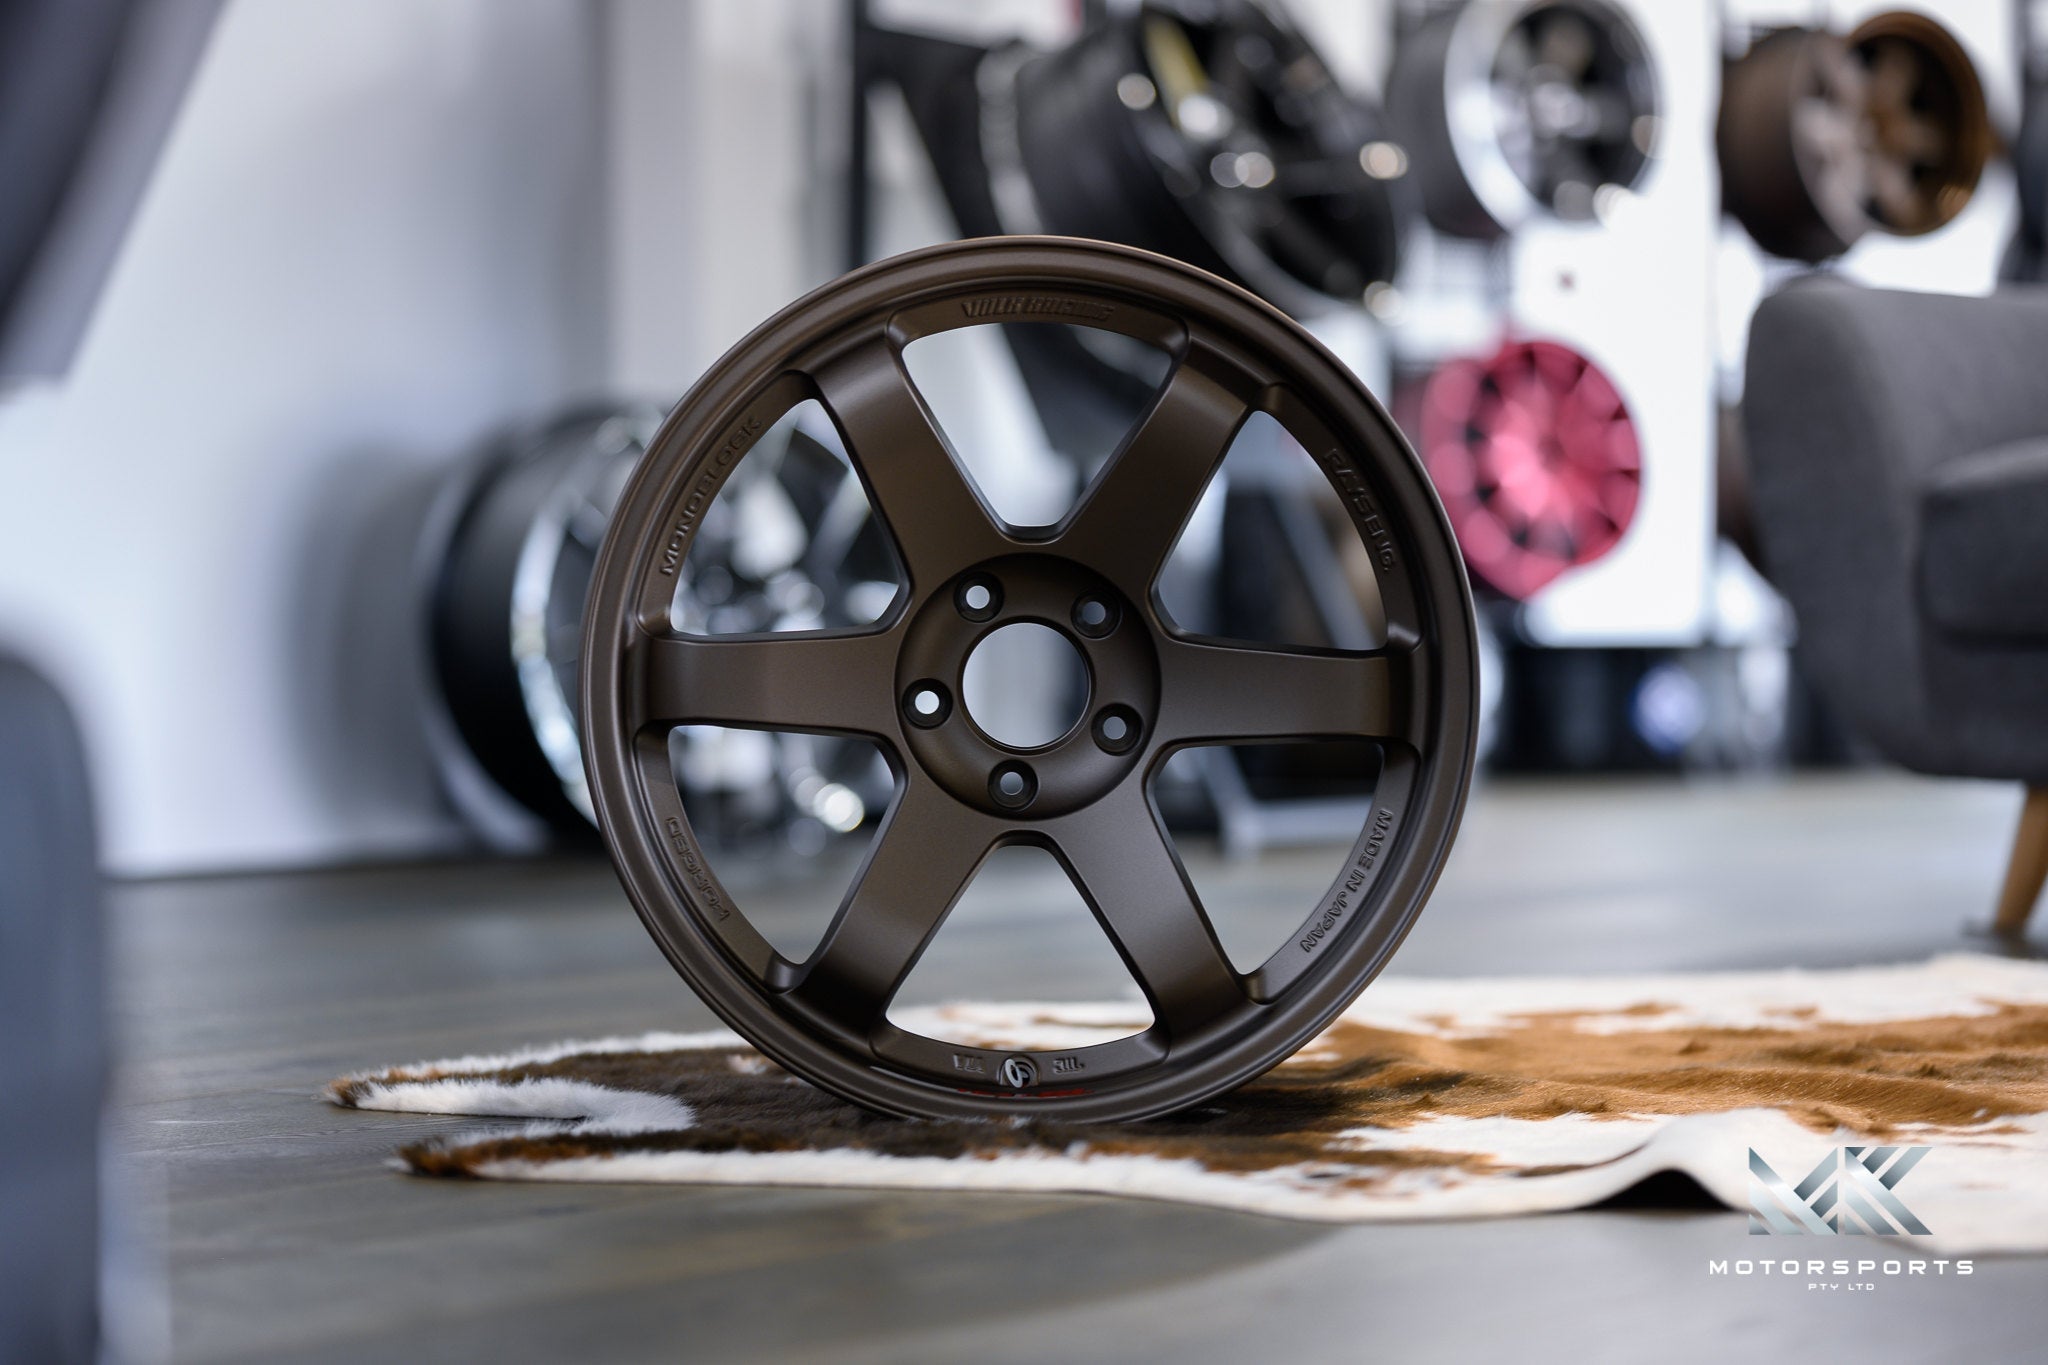 TE37SL - Obsolete Stock - Premium Wheels from MK MOTORSPORTS - From just $973.00! Shop now at MK MOTORSPORTS